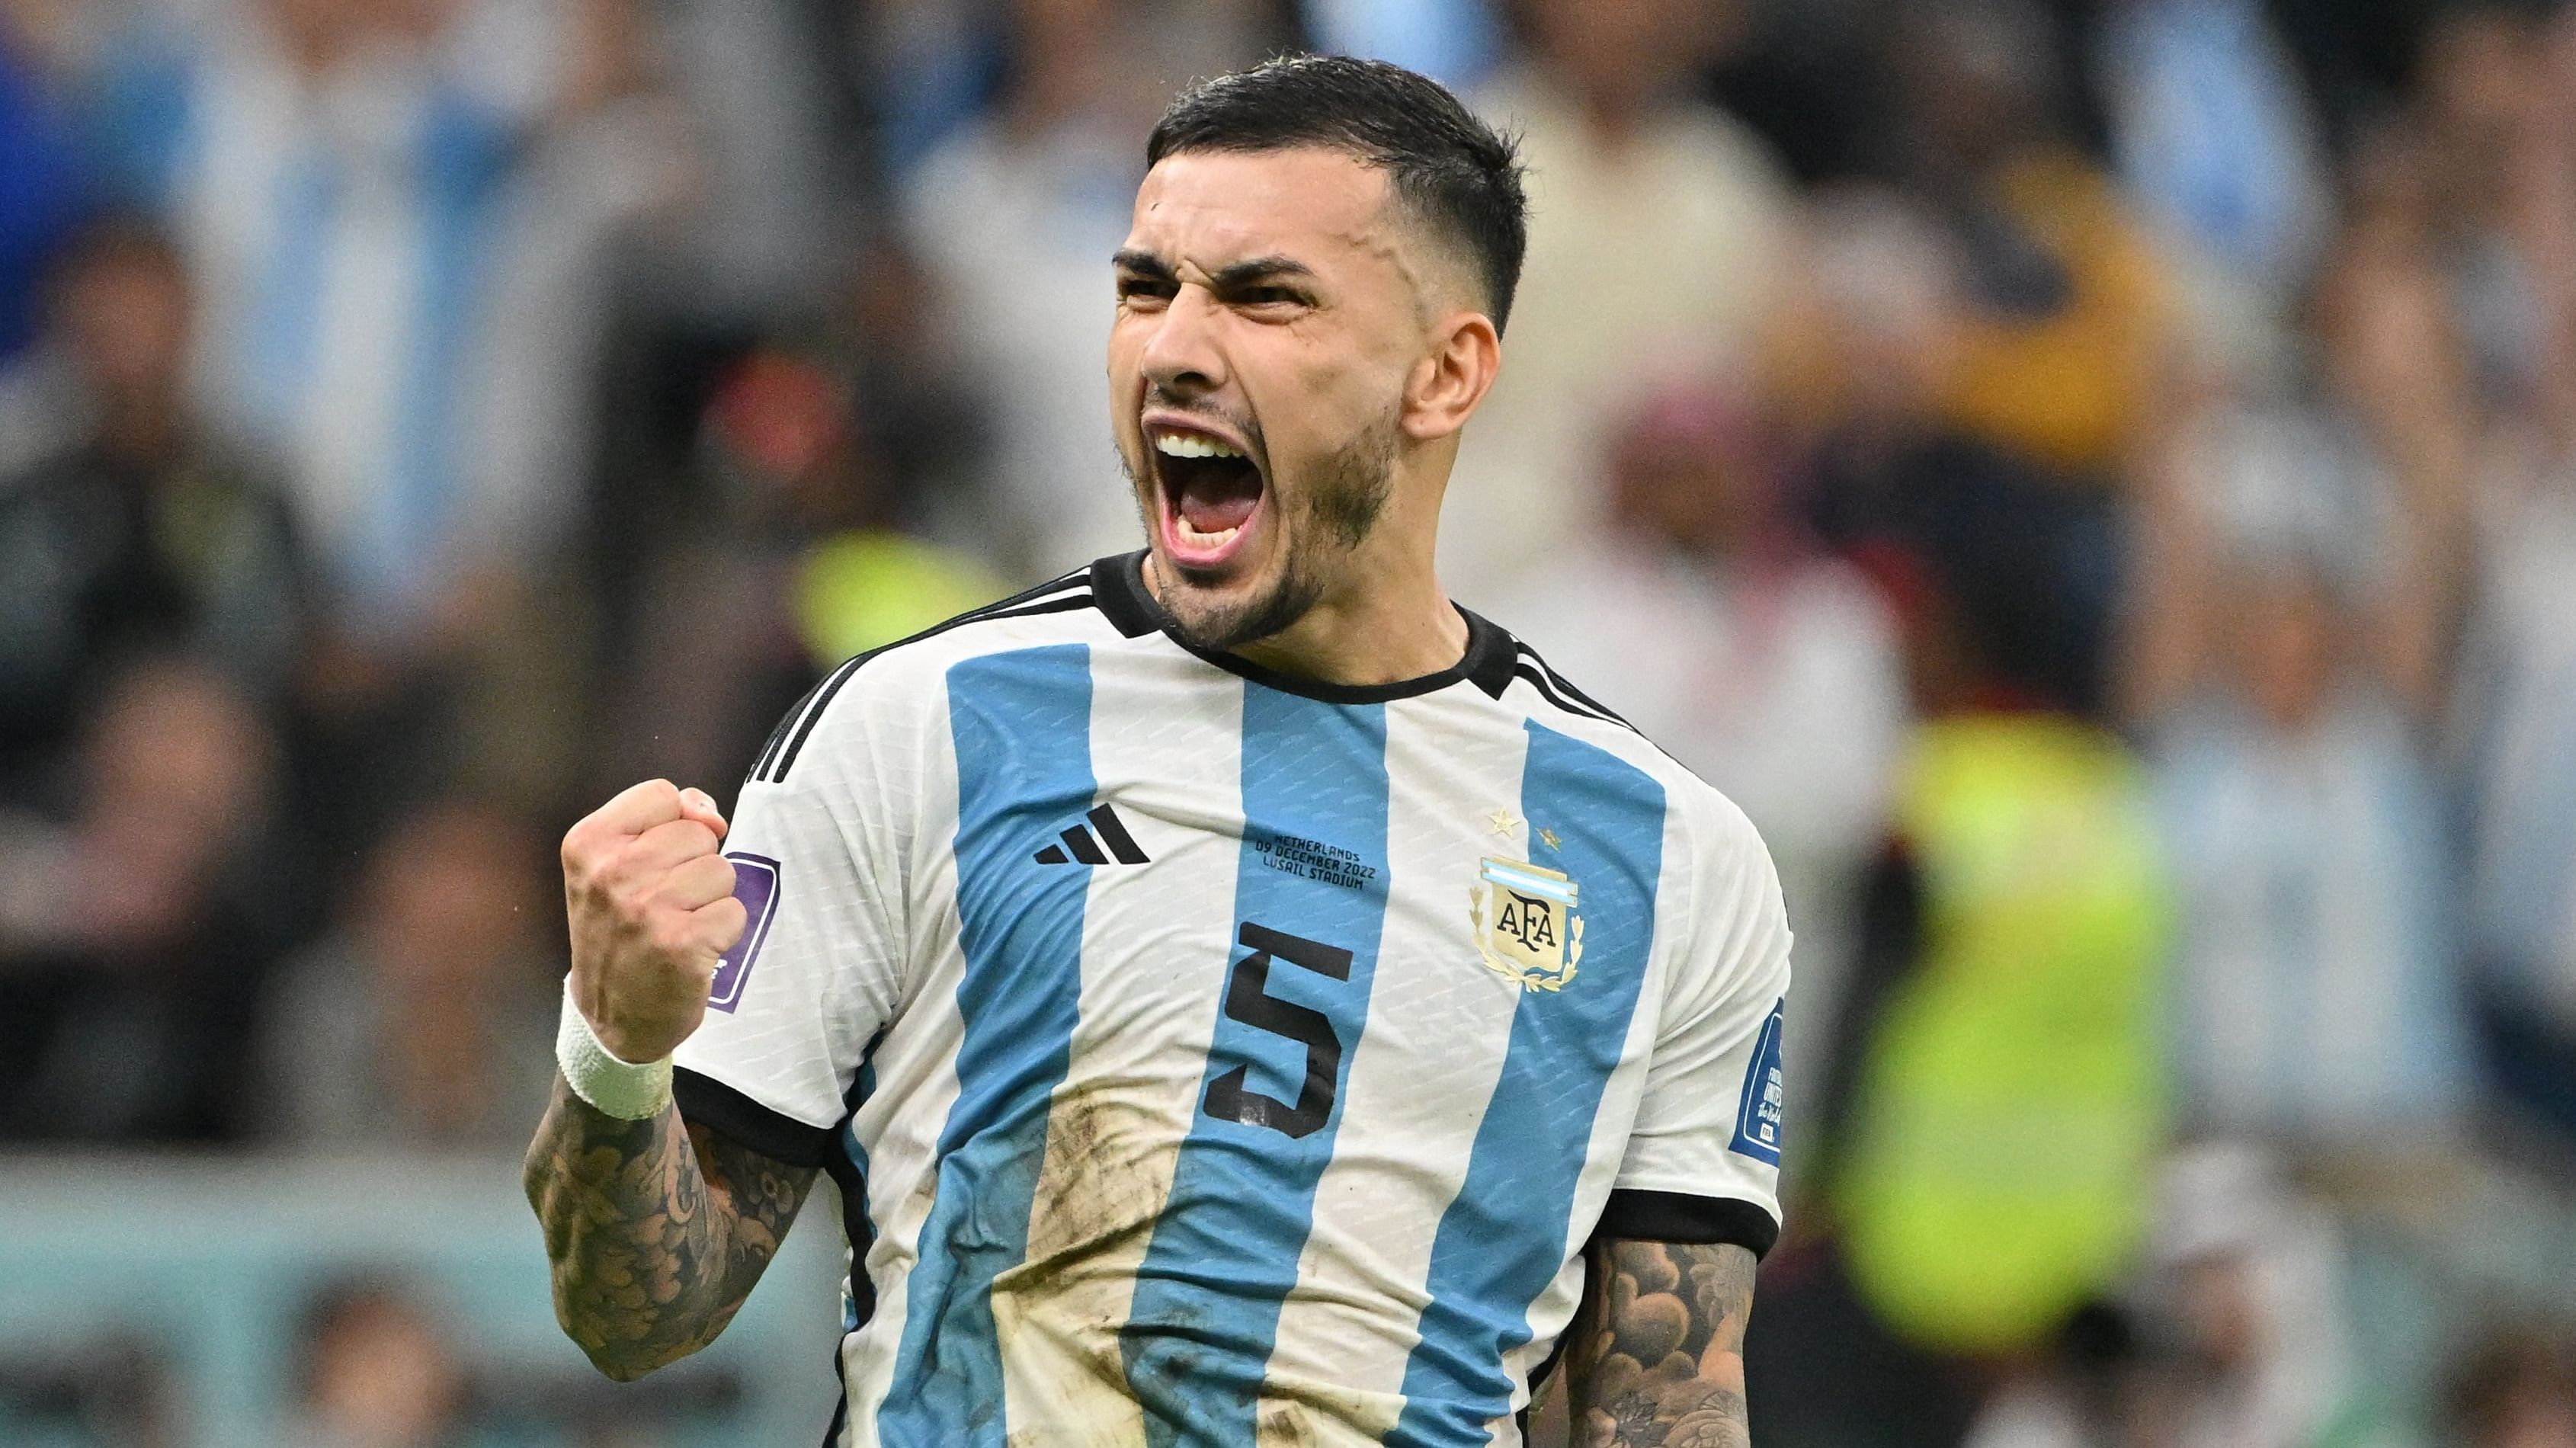 Argentina's midfielder #05 Leandro Paredes celebrates scoring during the shoot-out after extra-time. Credit: AFP Photo